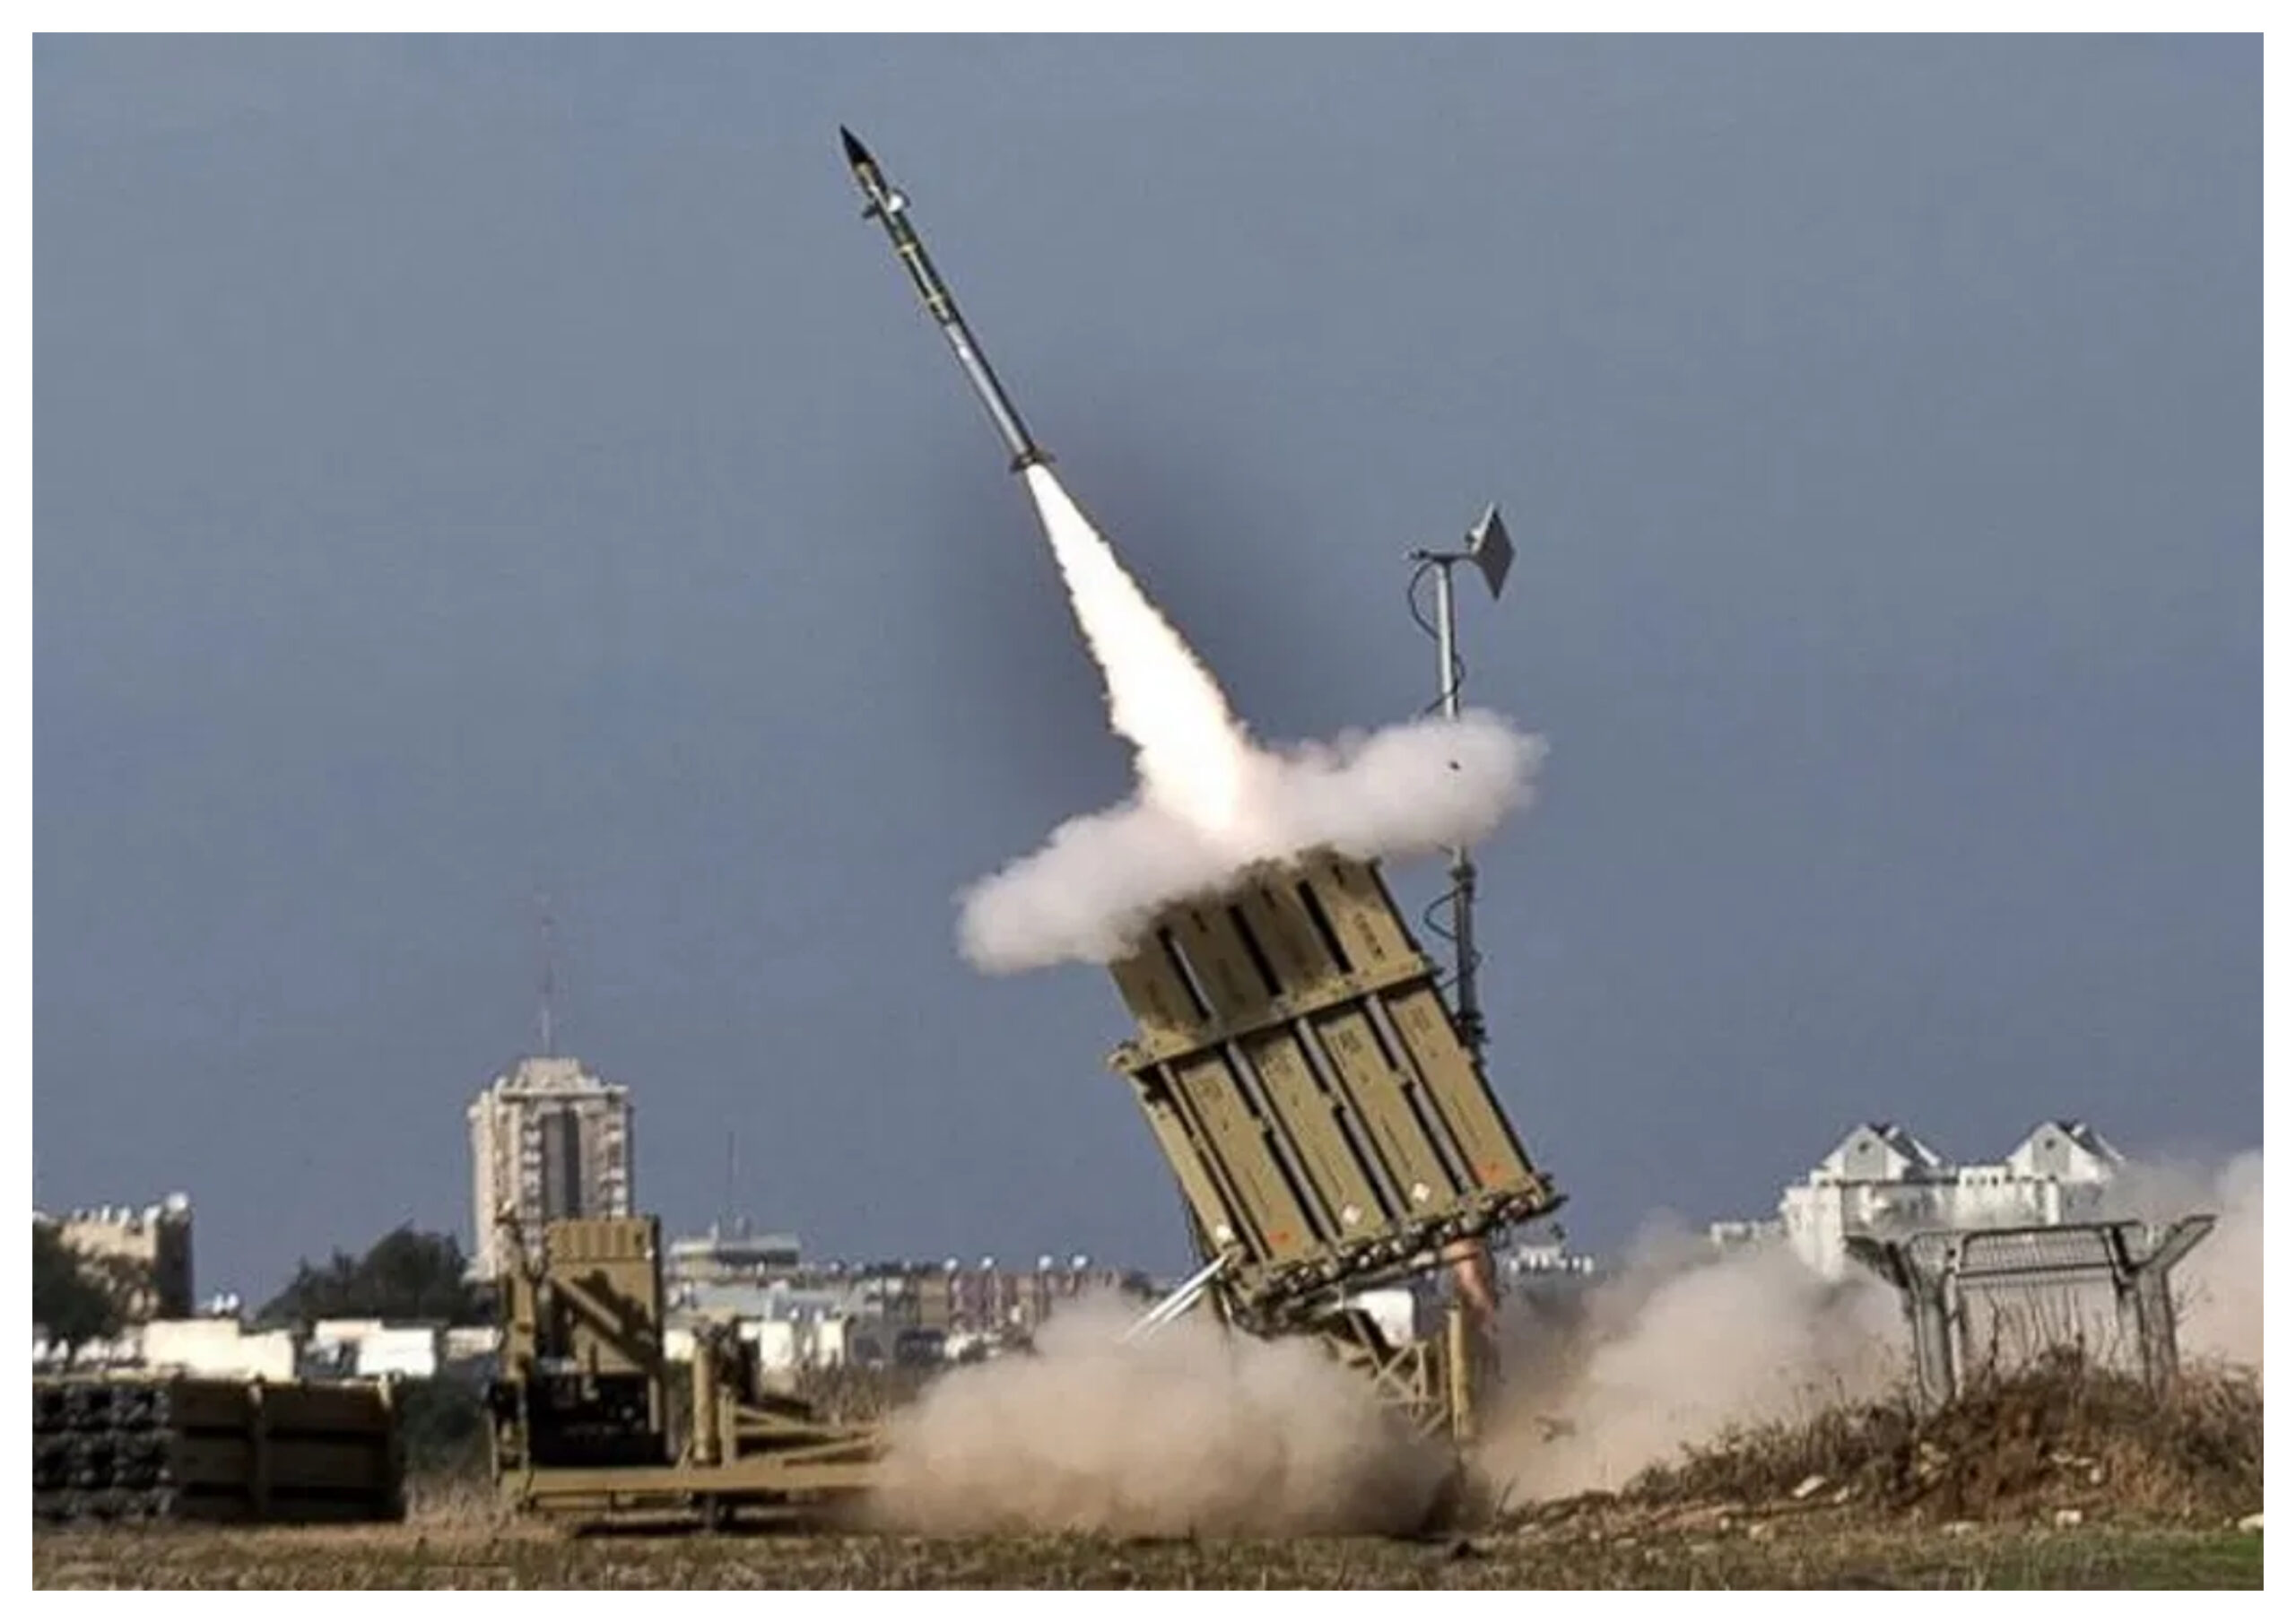 Iron Dome: Why is Israel's Iron Dome so special, which everyone is surprised to see?, israels-iron-dome-technology-works-which-shot-down-irans-missile-drones-in-the-air in hindi news